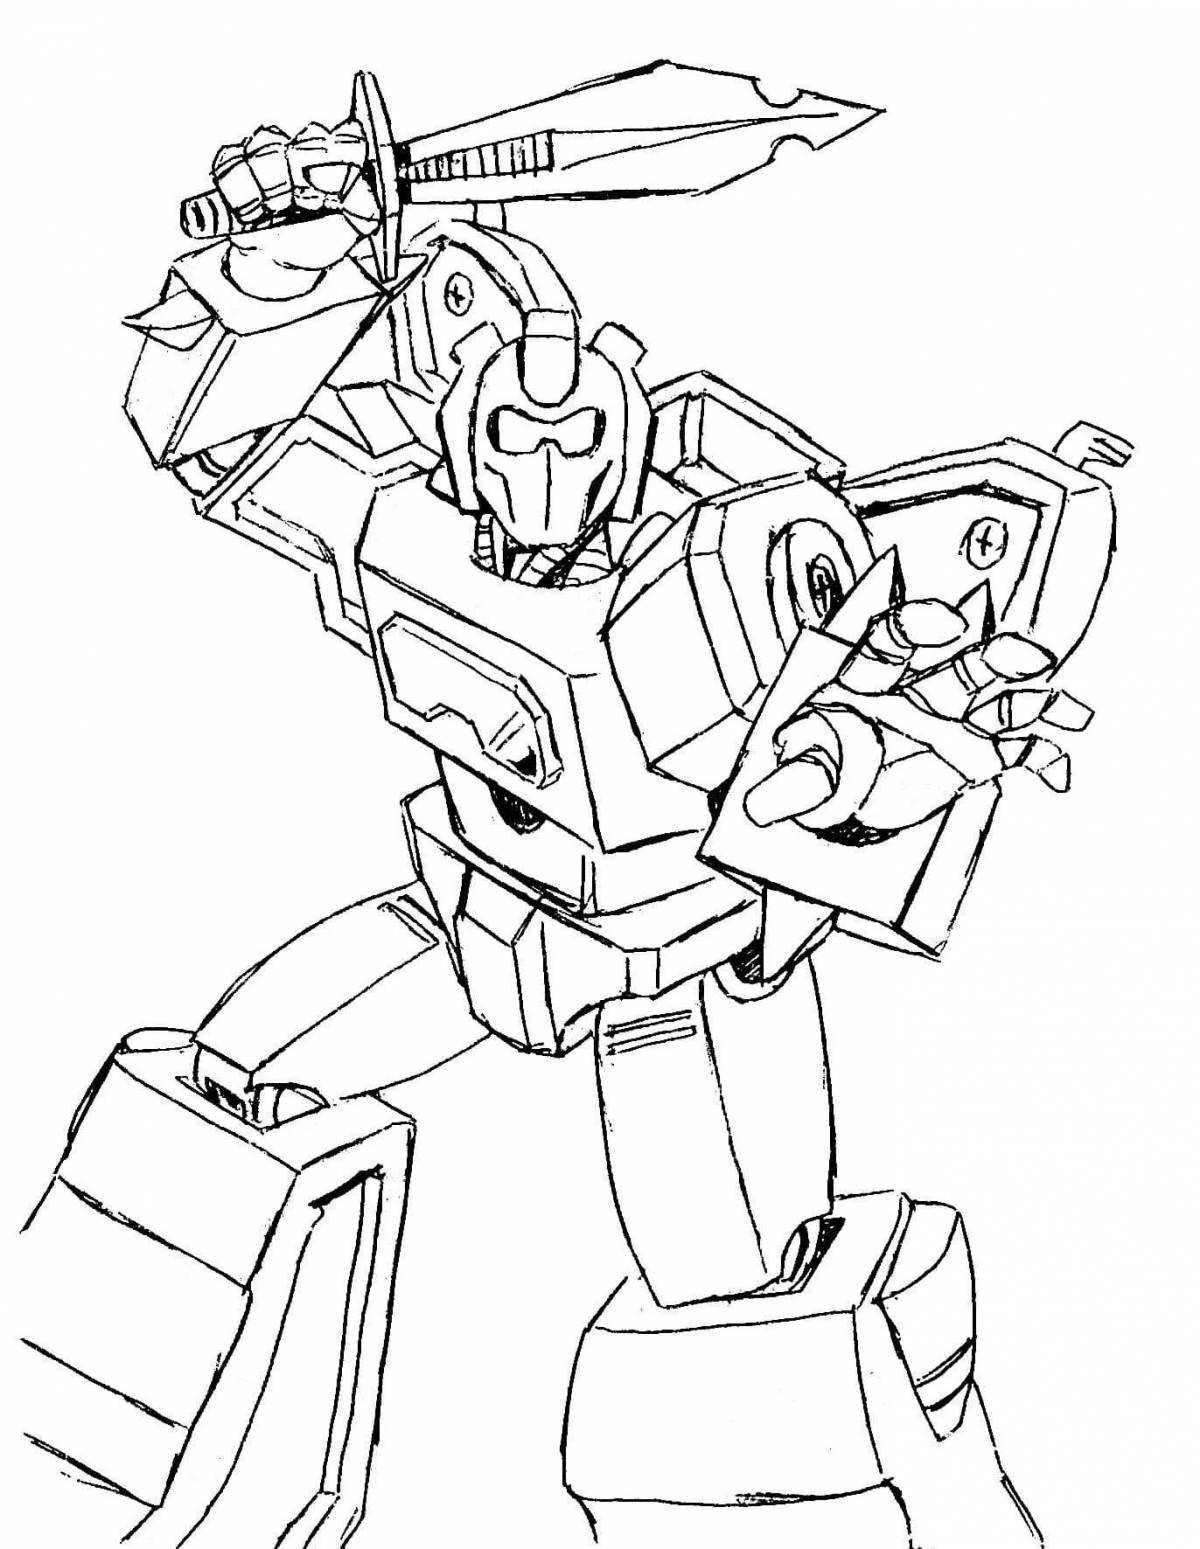 Transforming robot color-frenzy coloring pages for kids